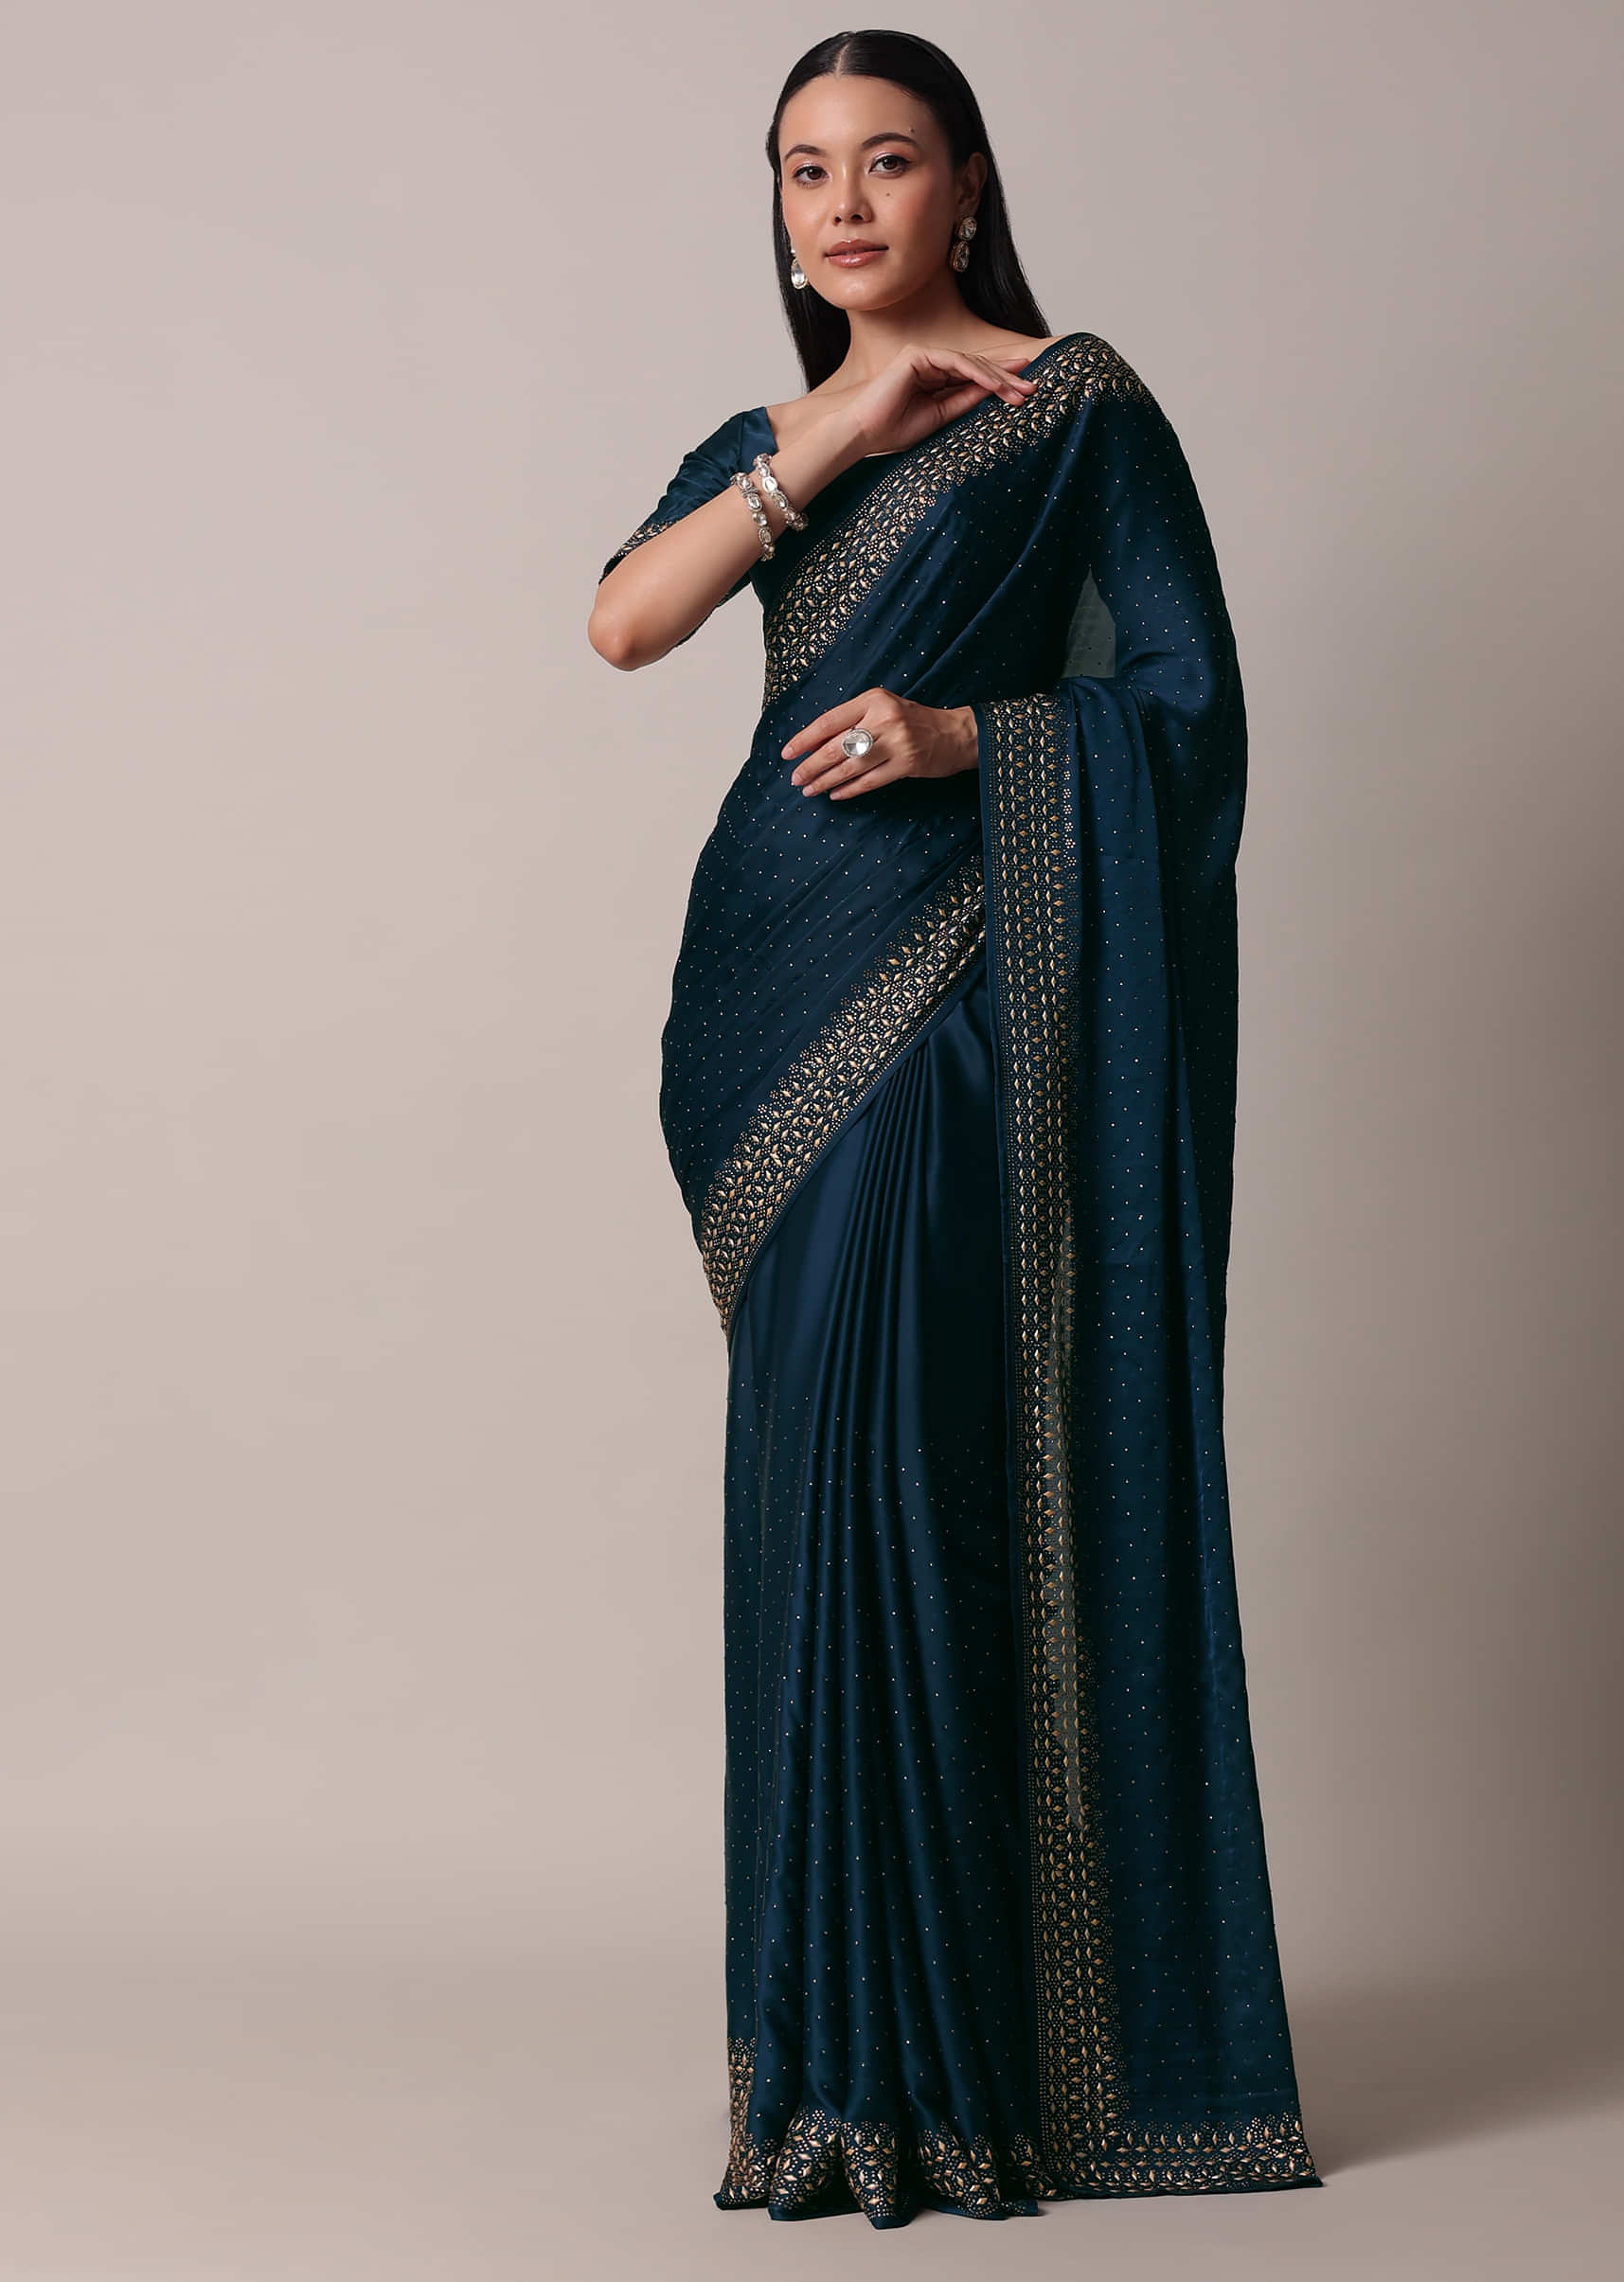 Sarees (साड़ी) - Buy Latest Sarees Collection Online for Women in India